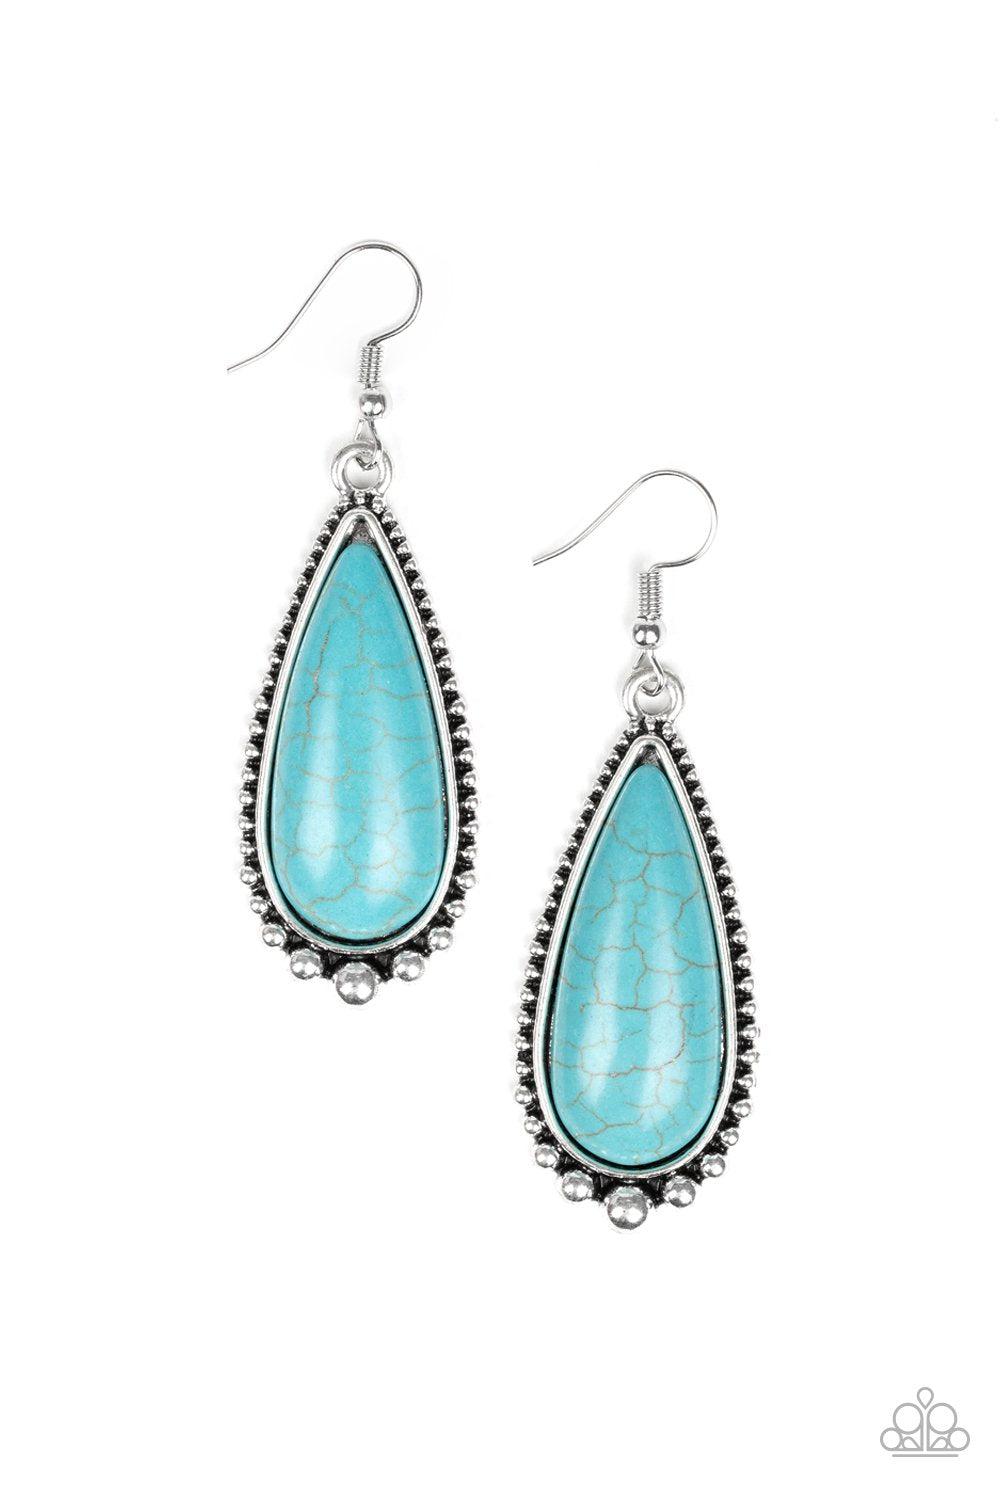 Desert Quench Turquoise Blue Stone Teardrop Earrings - Paparazzi Accessories-CarasShop.com - $5 Jewelry by Cara Jewels